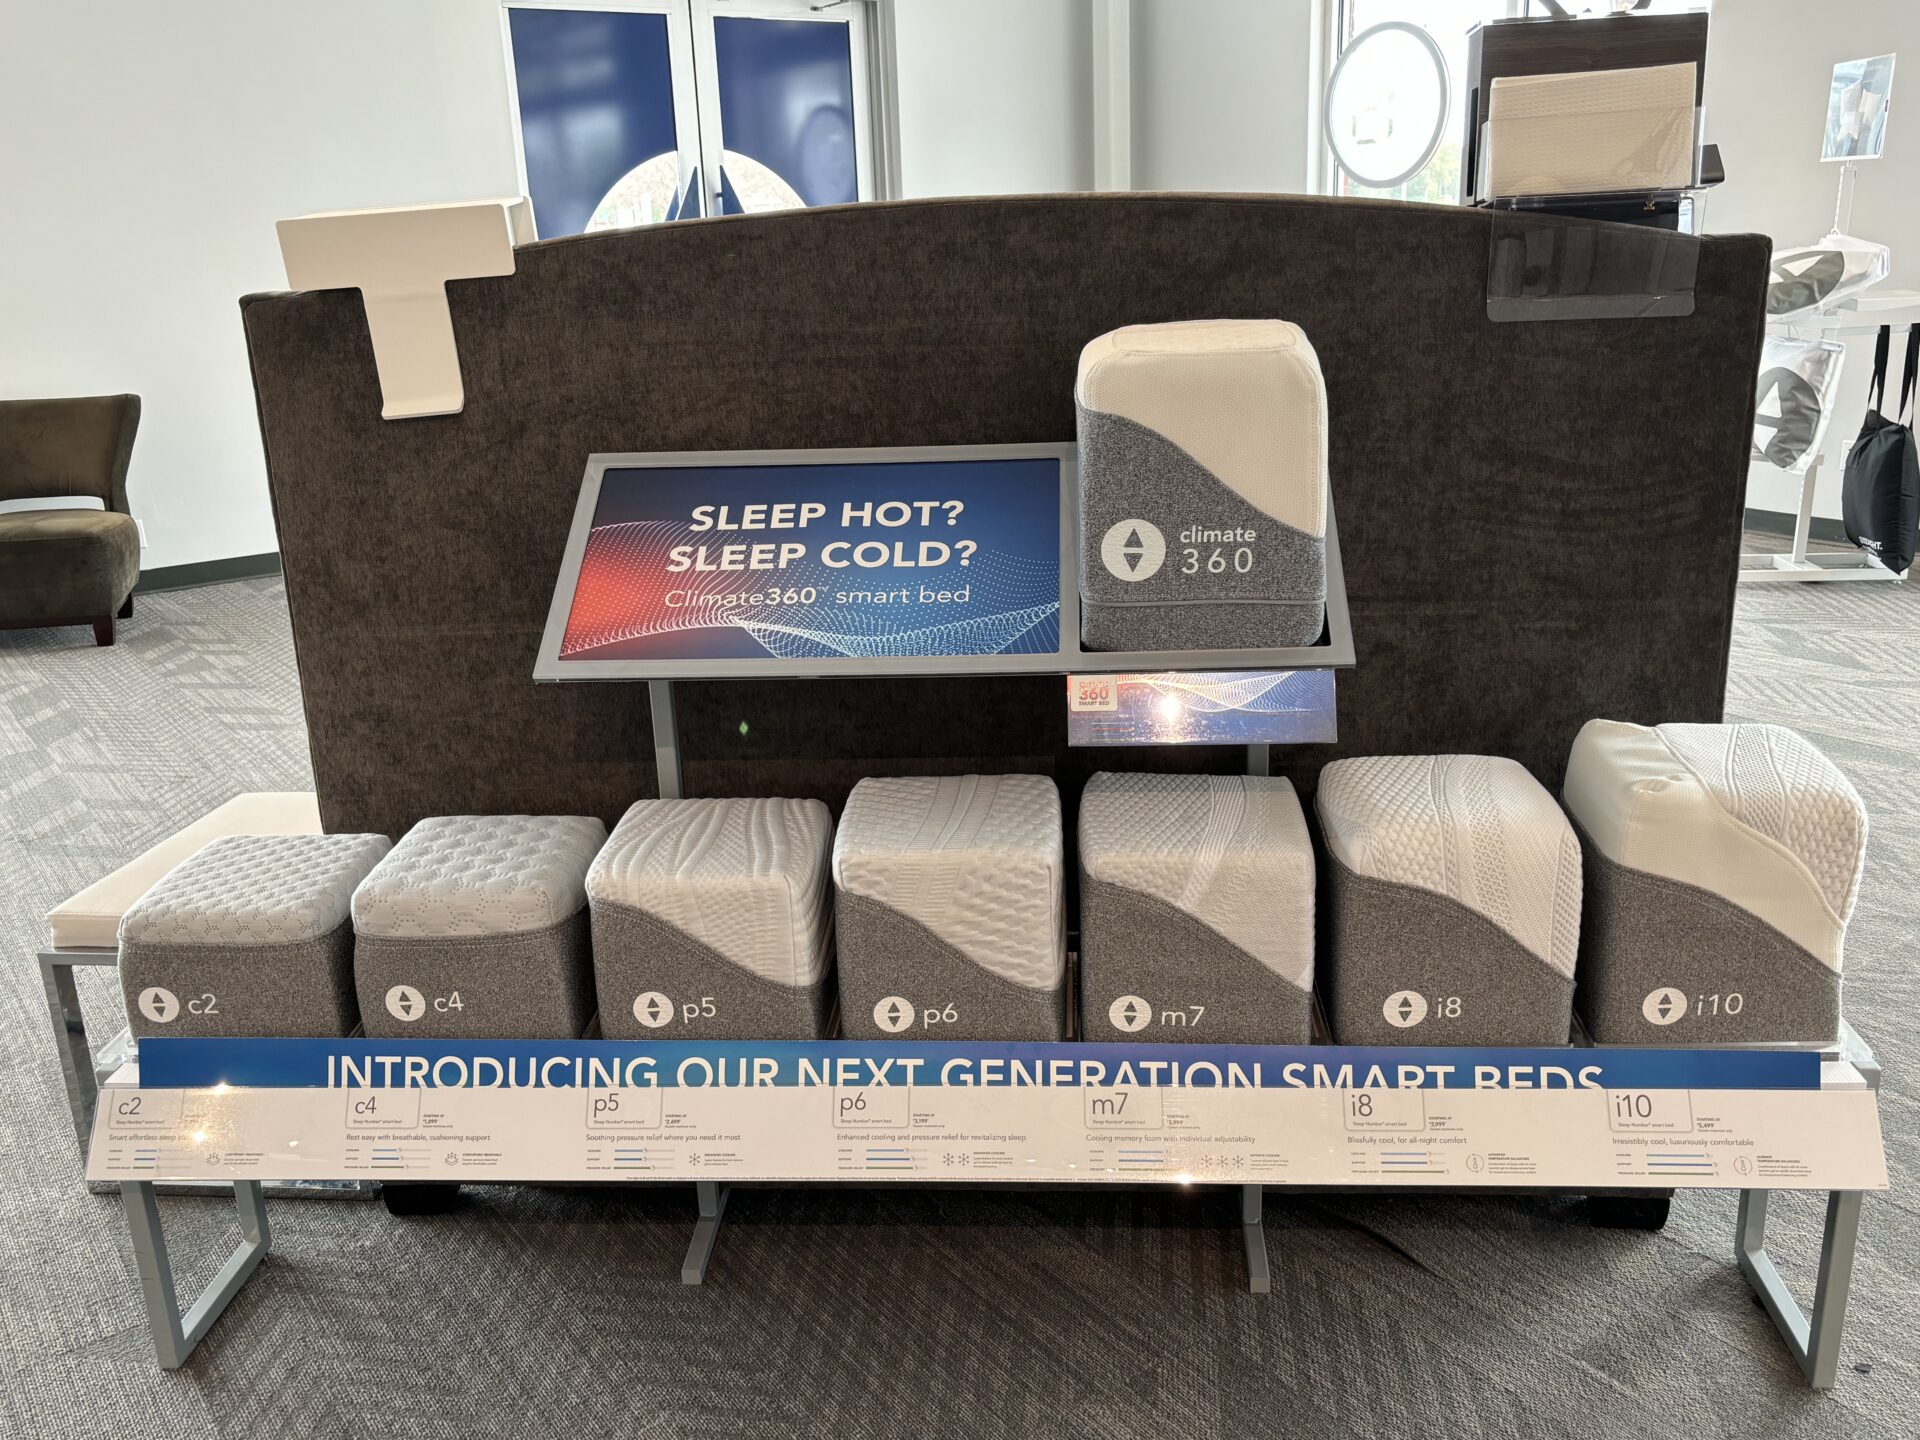 Sleep Number mattress samples shaped like blocks lined up next to each other